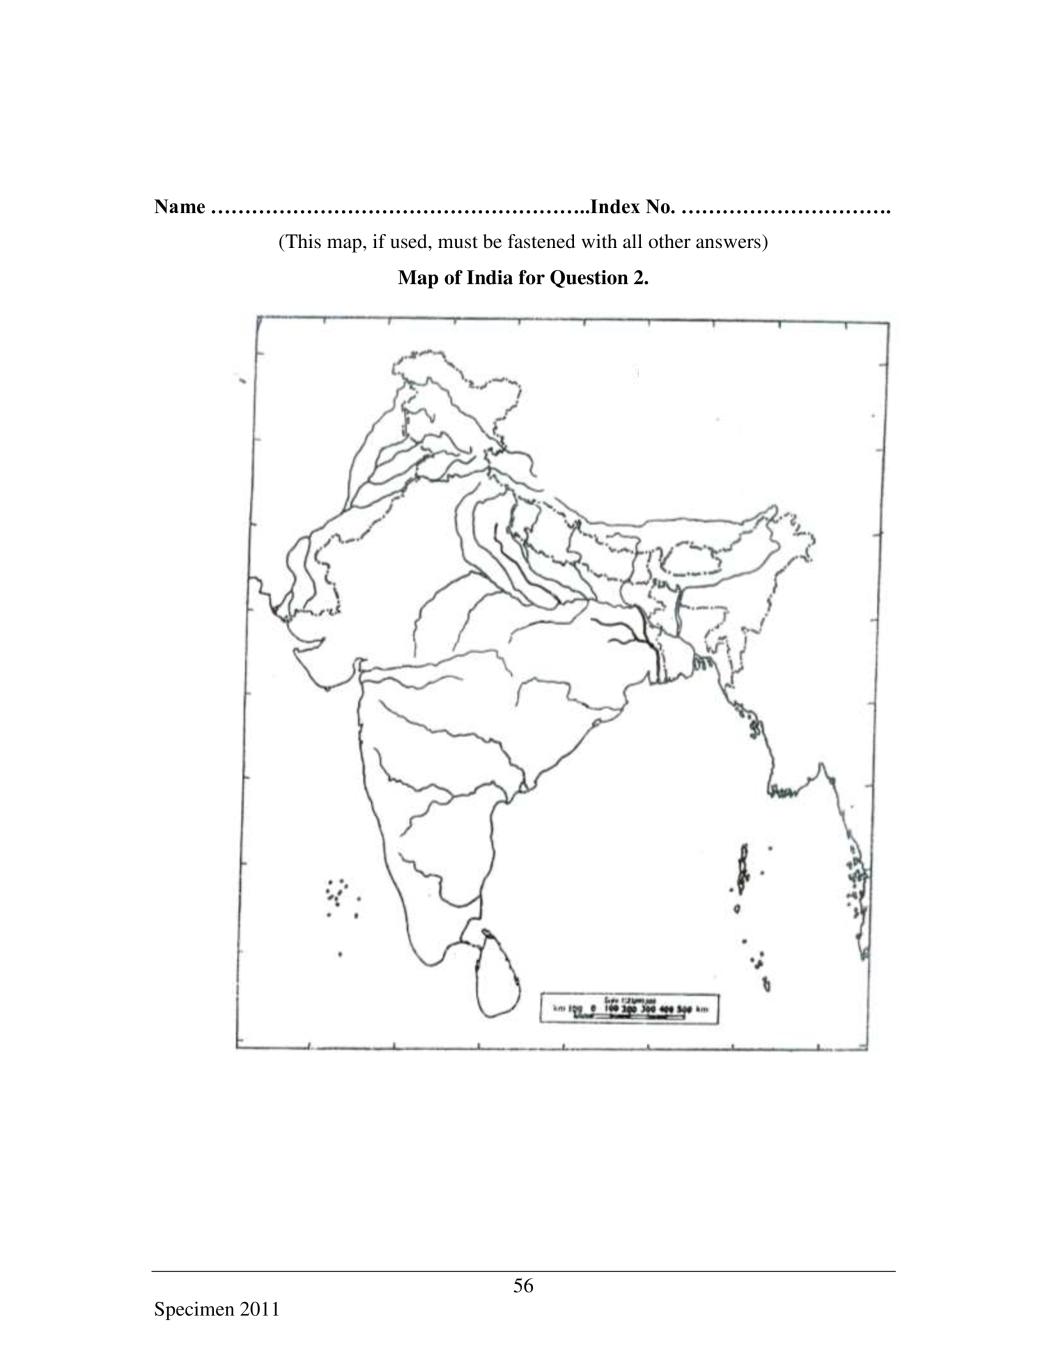 ICSE Class 10 Sample Paper 2020 Geography (H.C.G. Paper 2